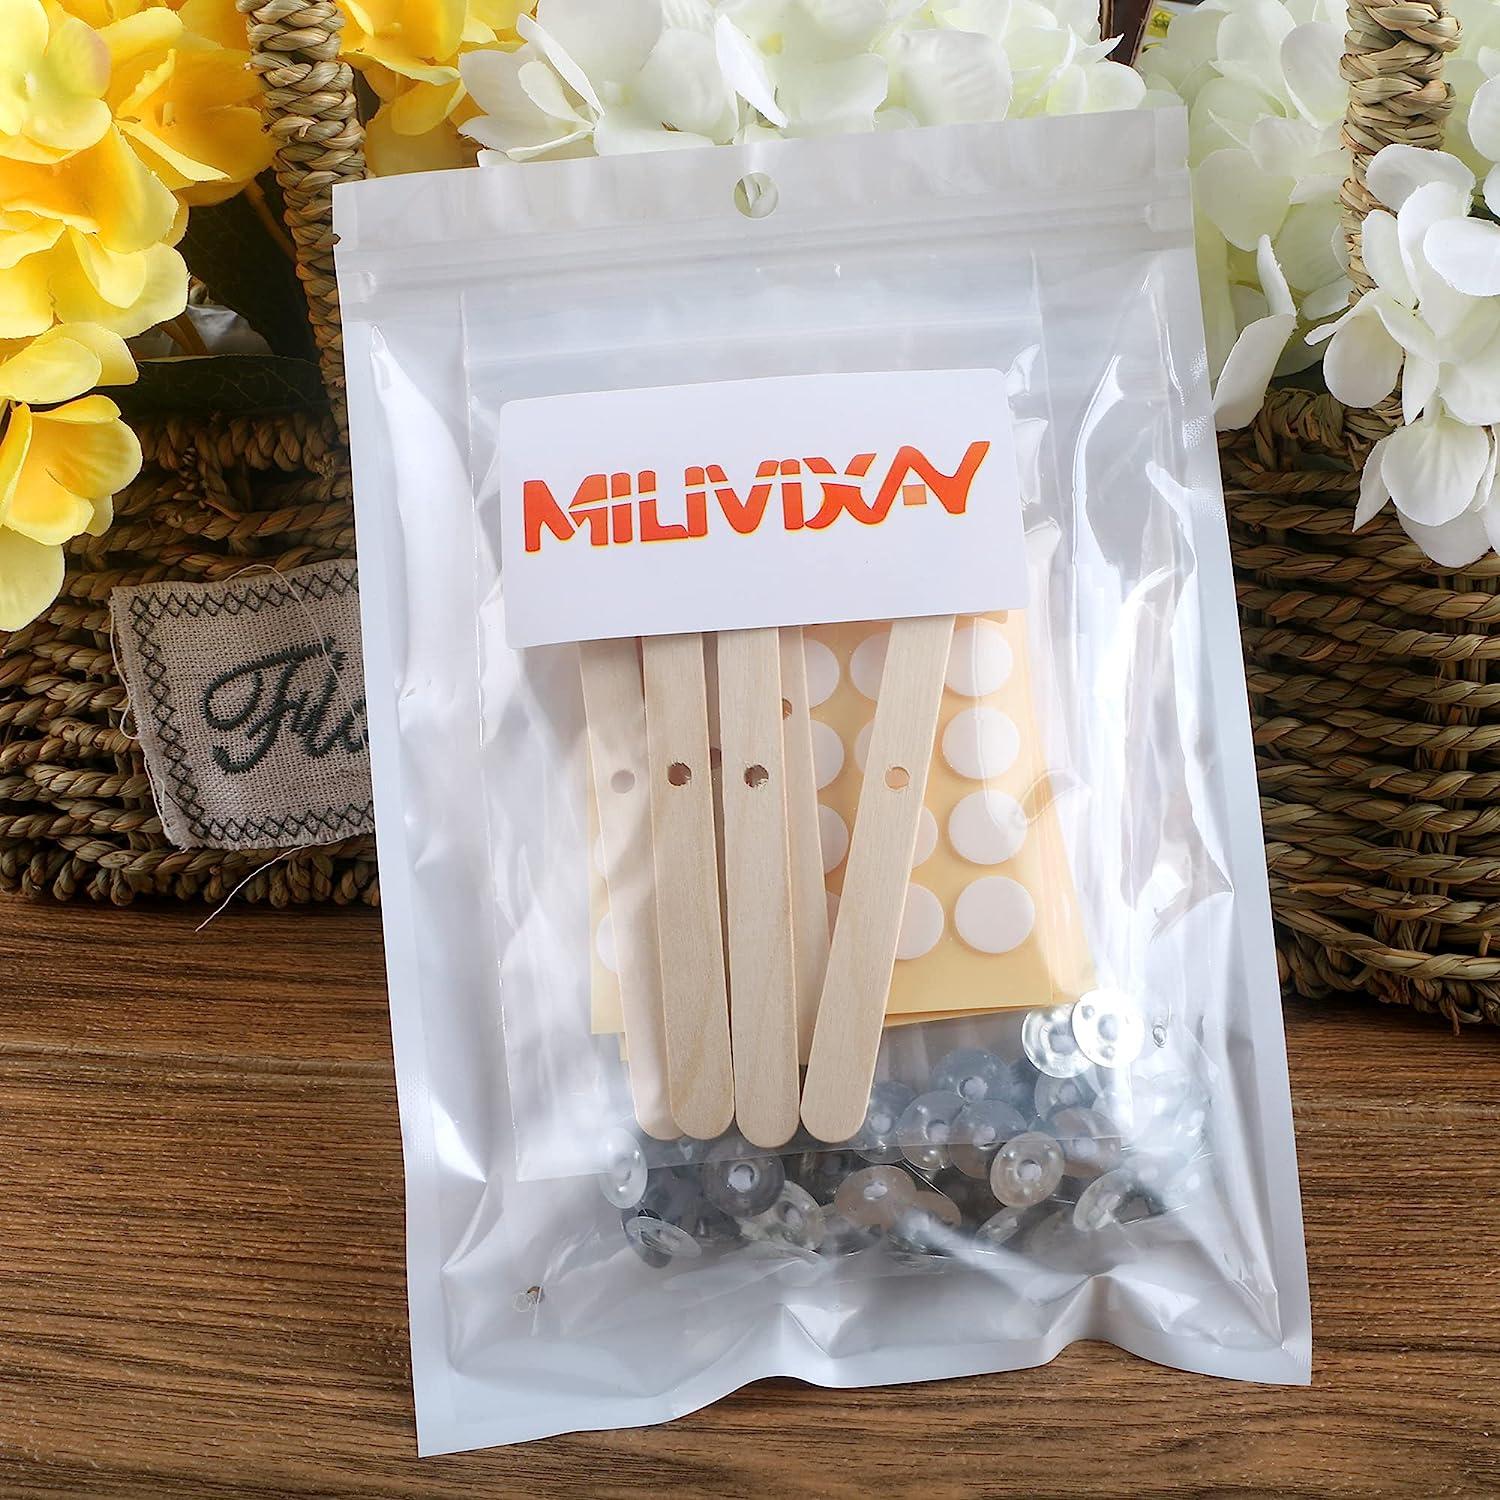 MILIVIXAY 100 Piece 10 inch Candle Wicks-Pre-Waxed-Candle Wicks for Candle Making